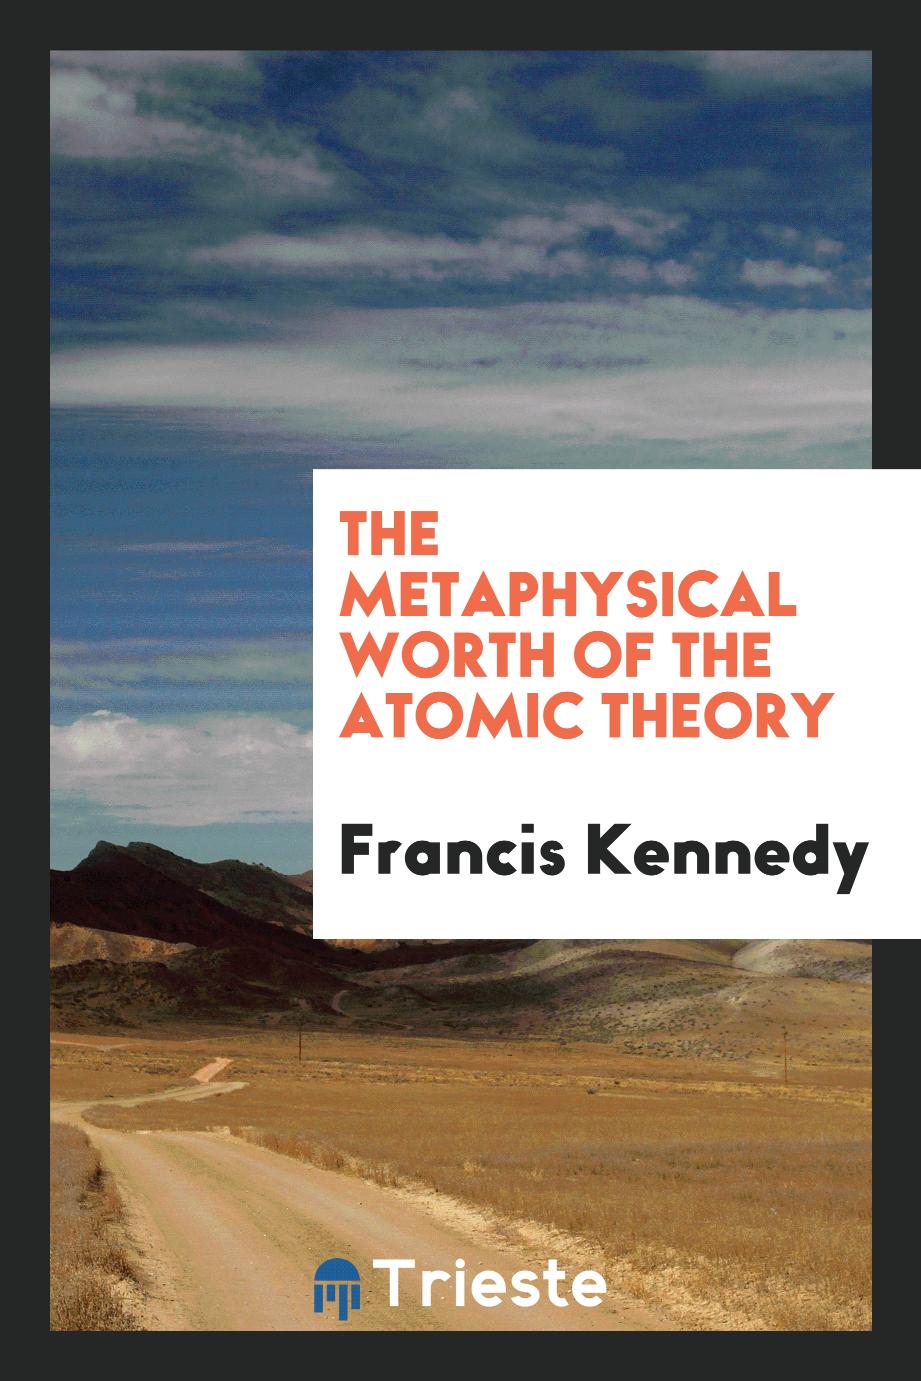 The Metaphysical Worth of the Atomic Theory